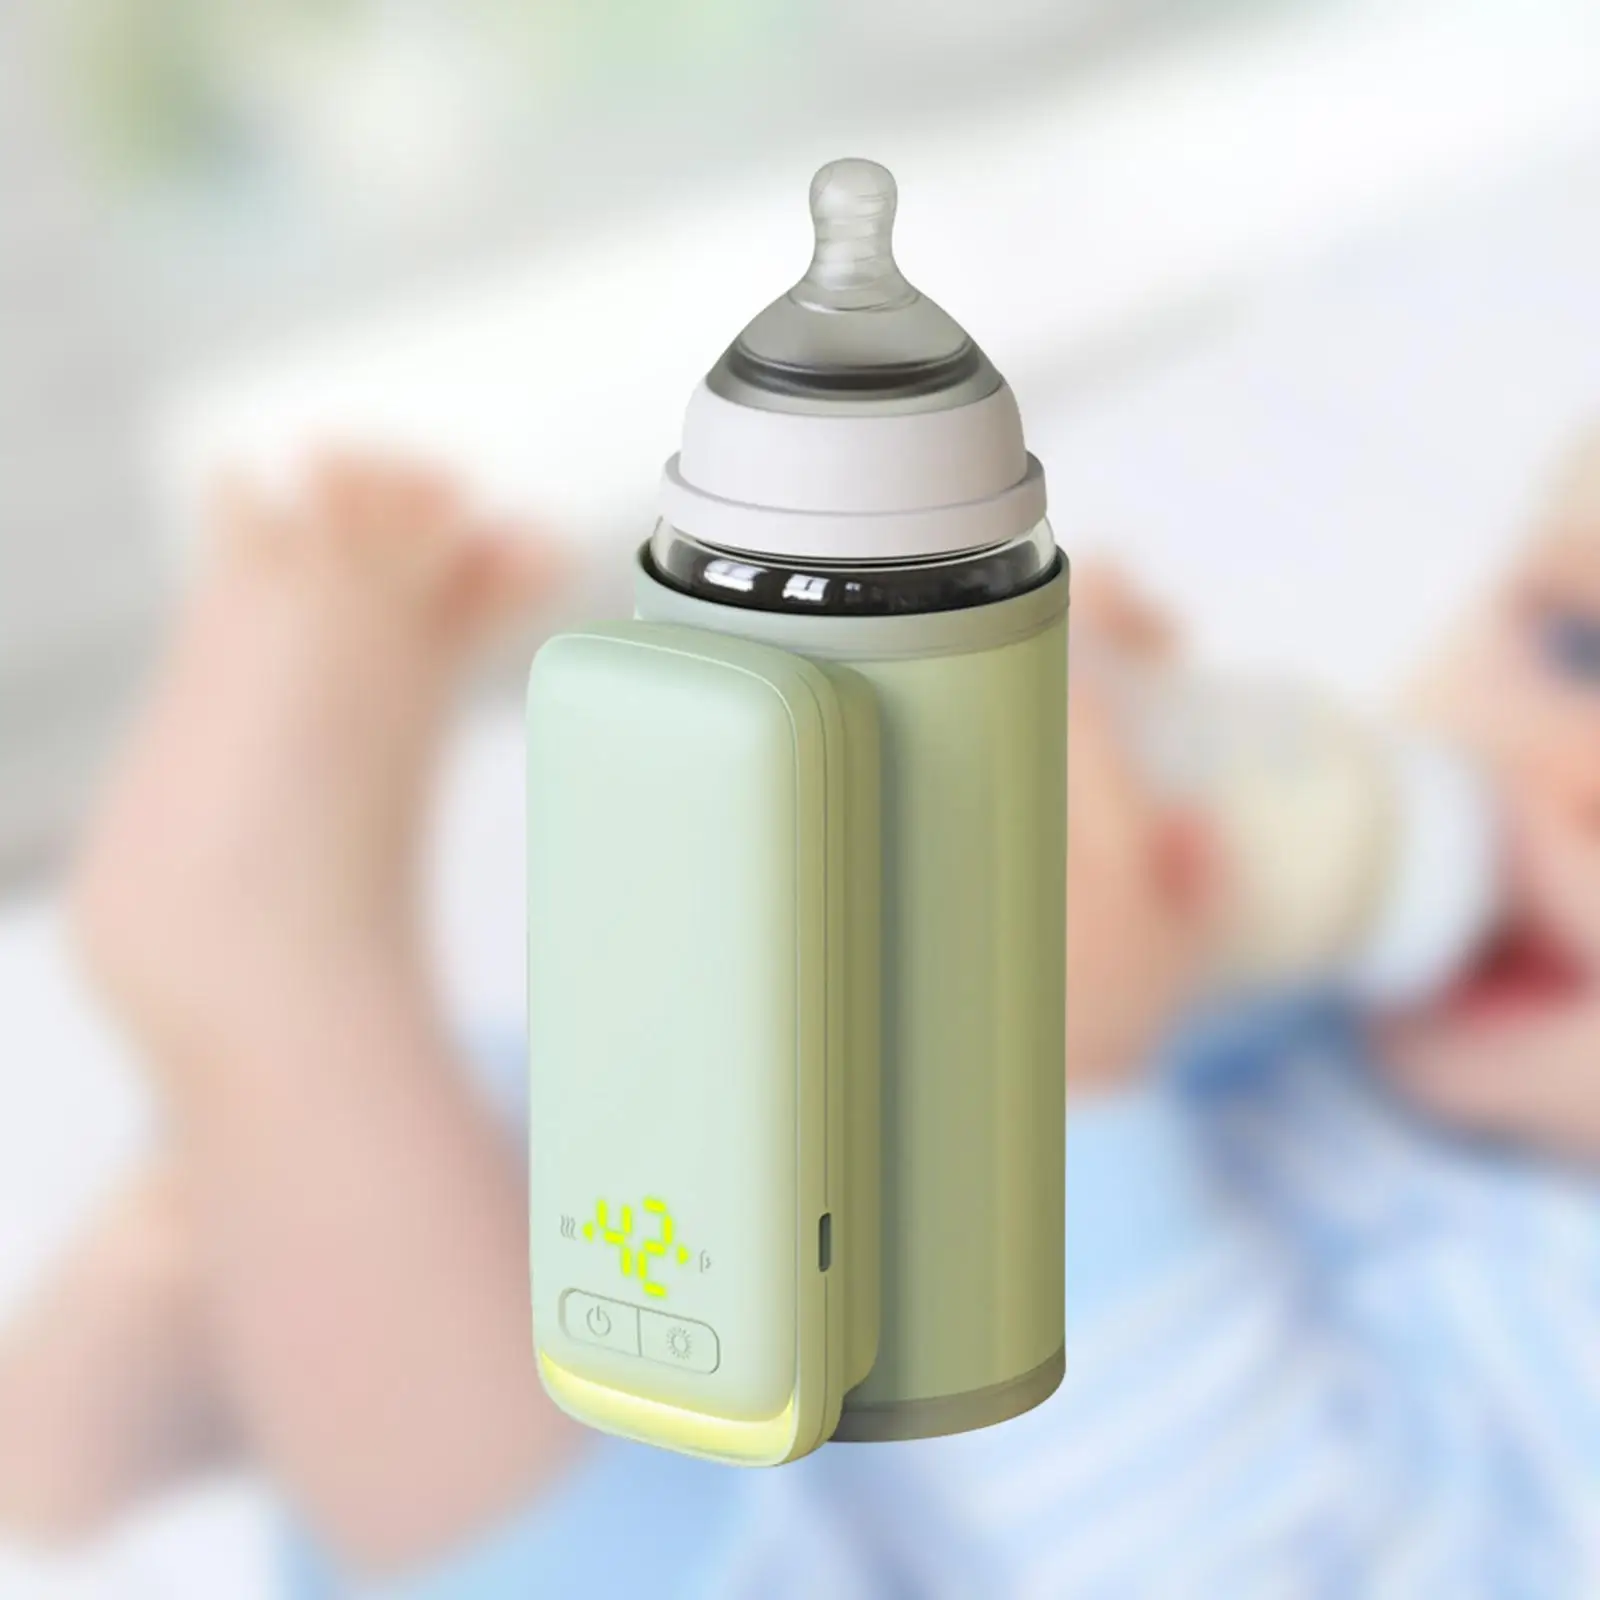 Baby Bottle Warmer Night Light Function Heating Sleeve Adjustable for Outdoor Activities Night Feeding Daily Use Picnics Travel